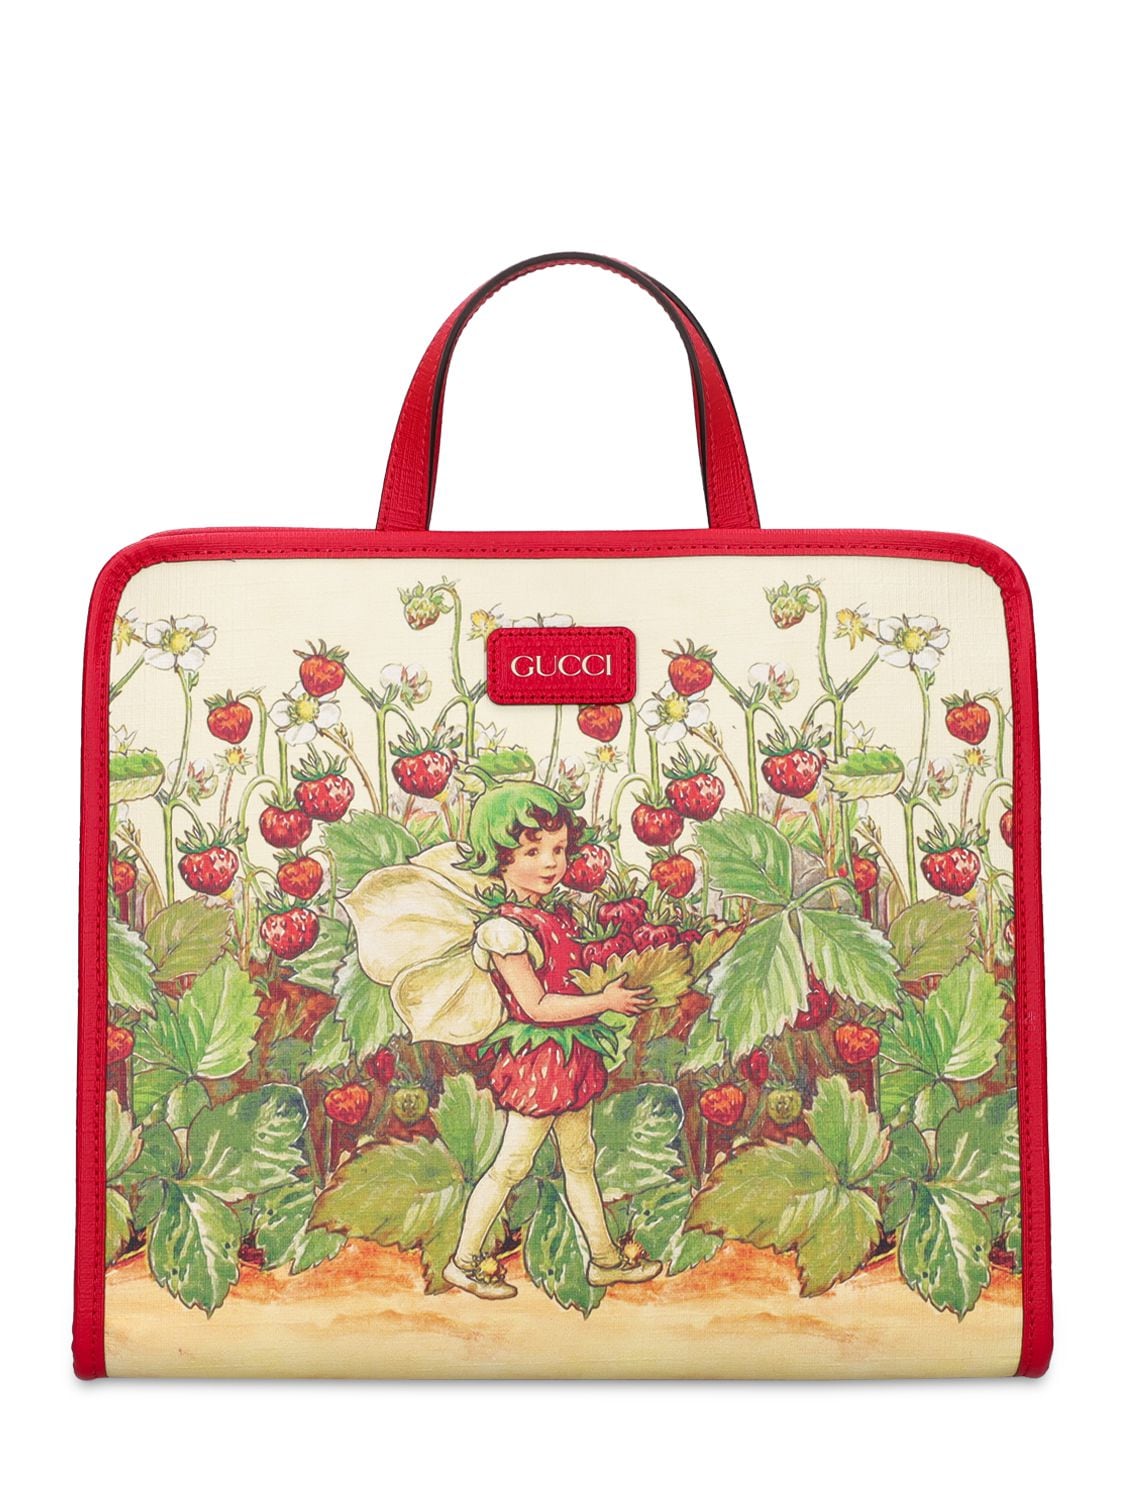 GUCCI STRAWBERRY FAIRY PRINTED TOP HANDLE BAG